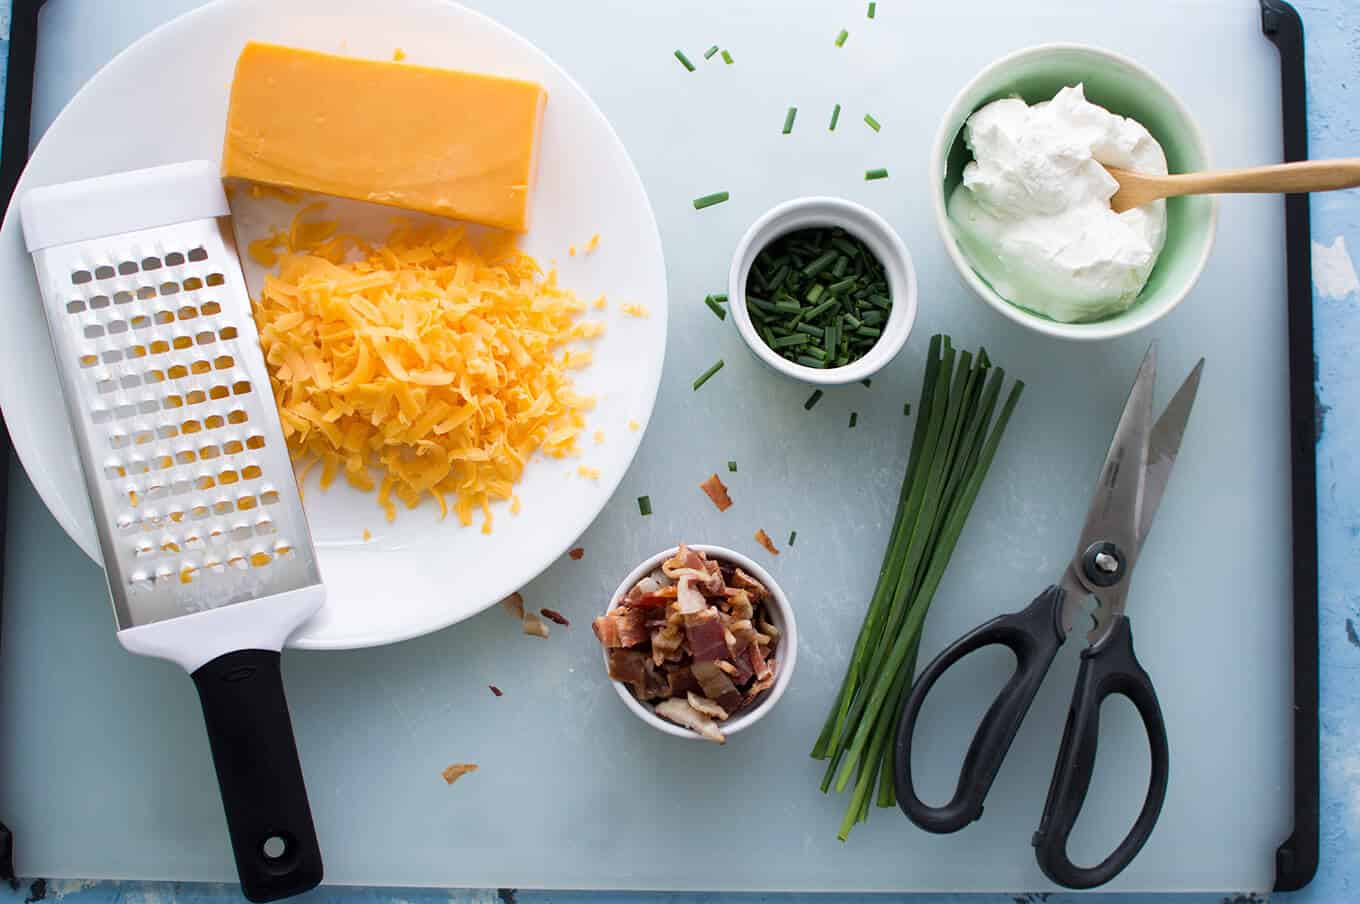 Plates of shredded cheese, chopped bacon, chives, and sour cream on a table.